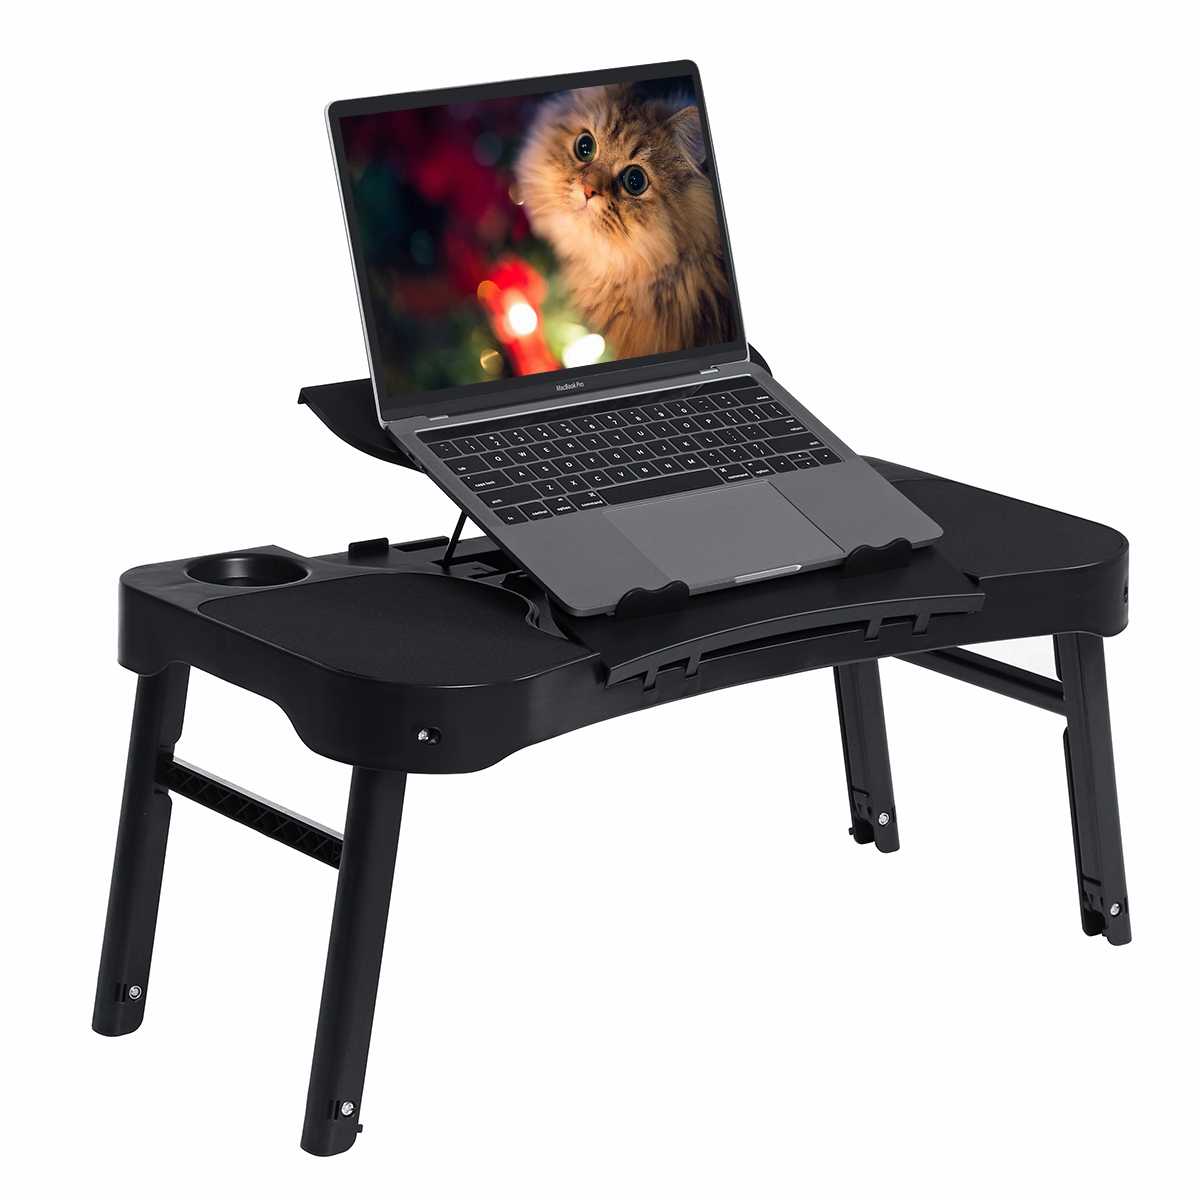 Collapsible Laptop Desk Folding Study Table Bed Desk With Mouse